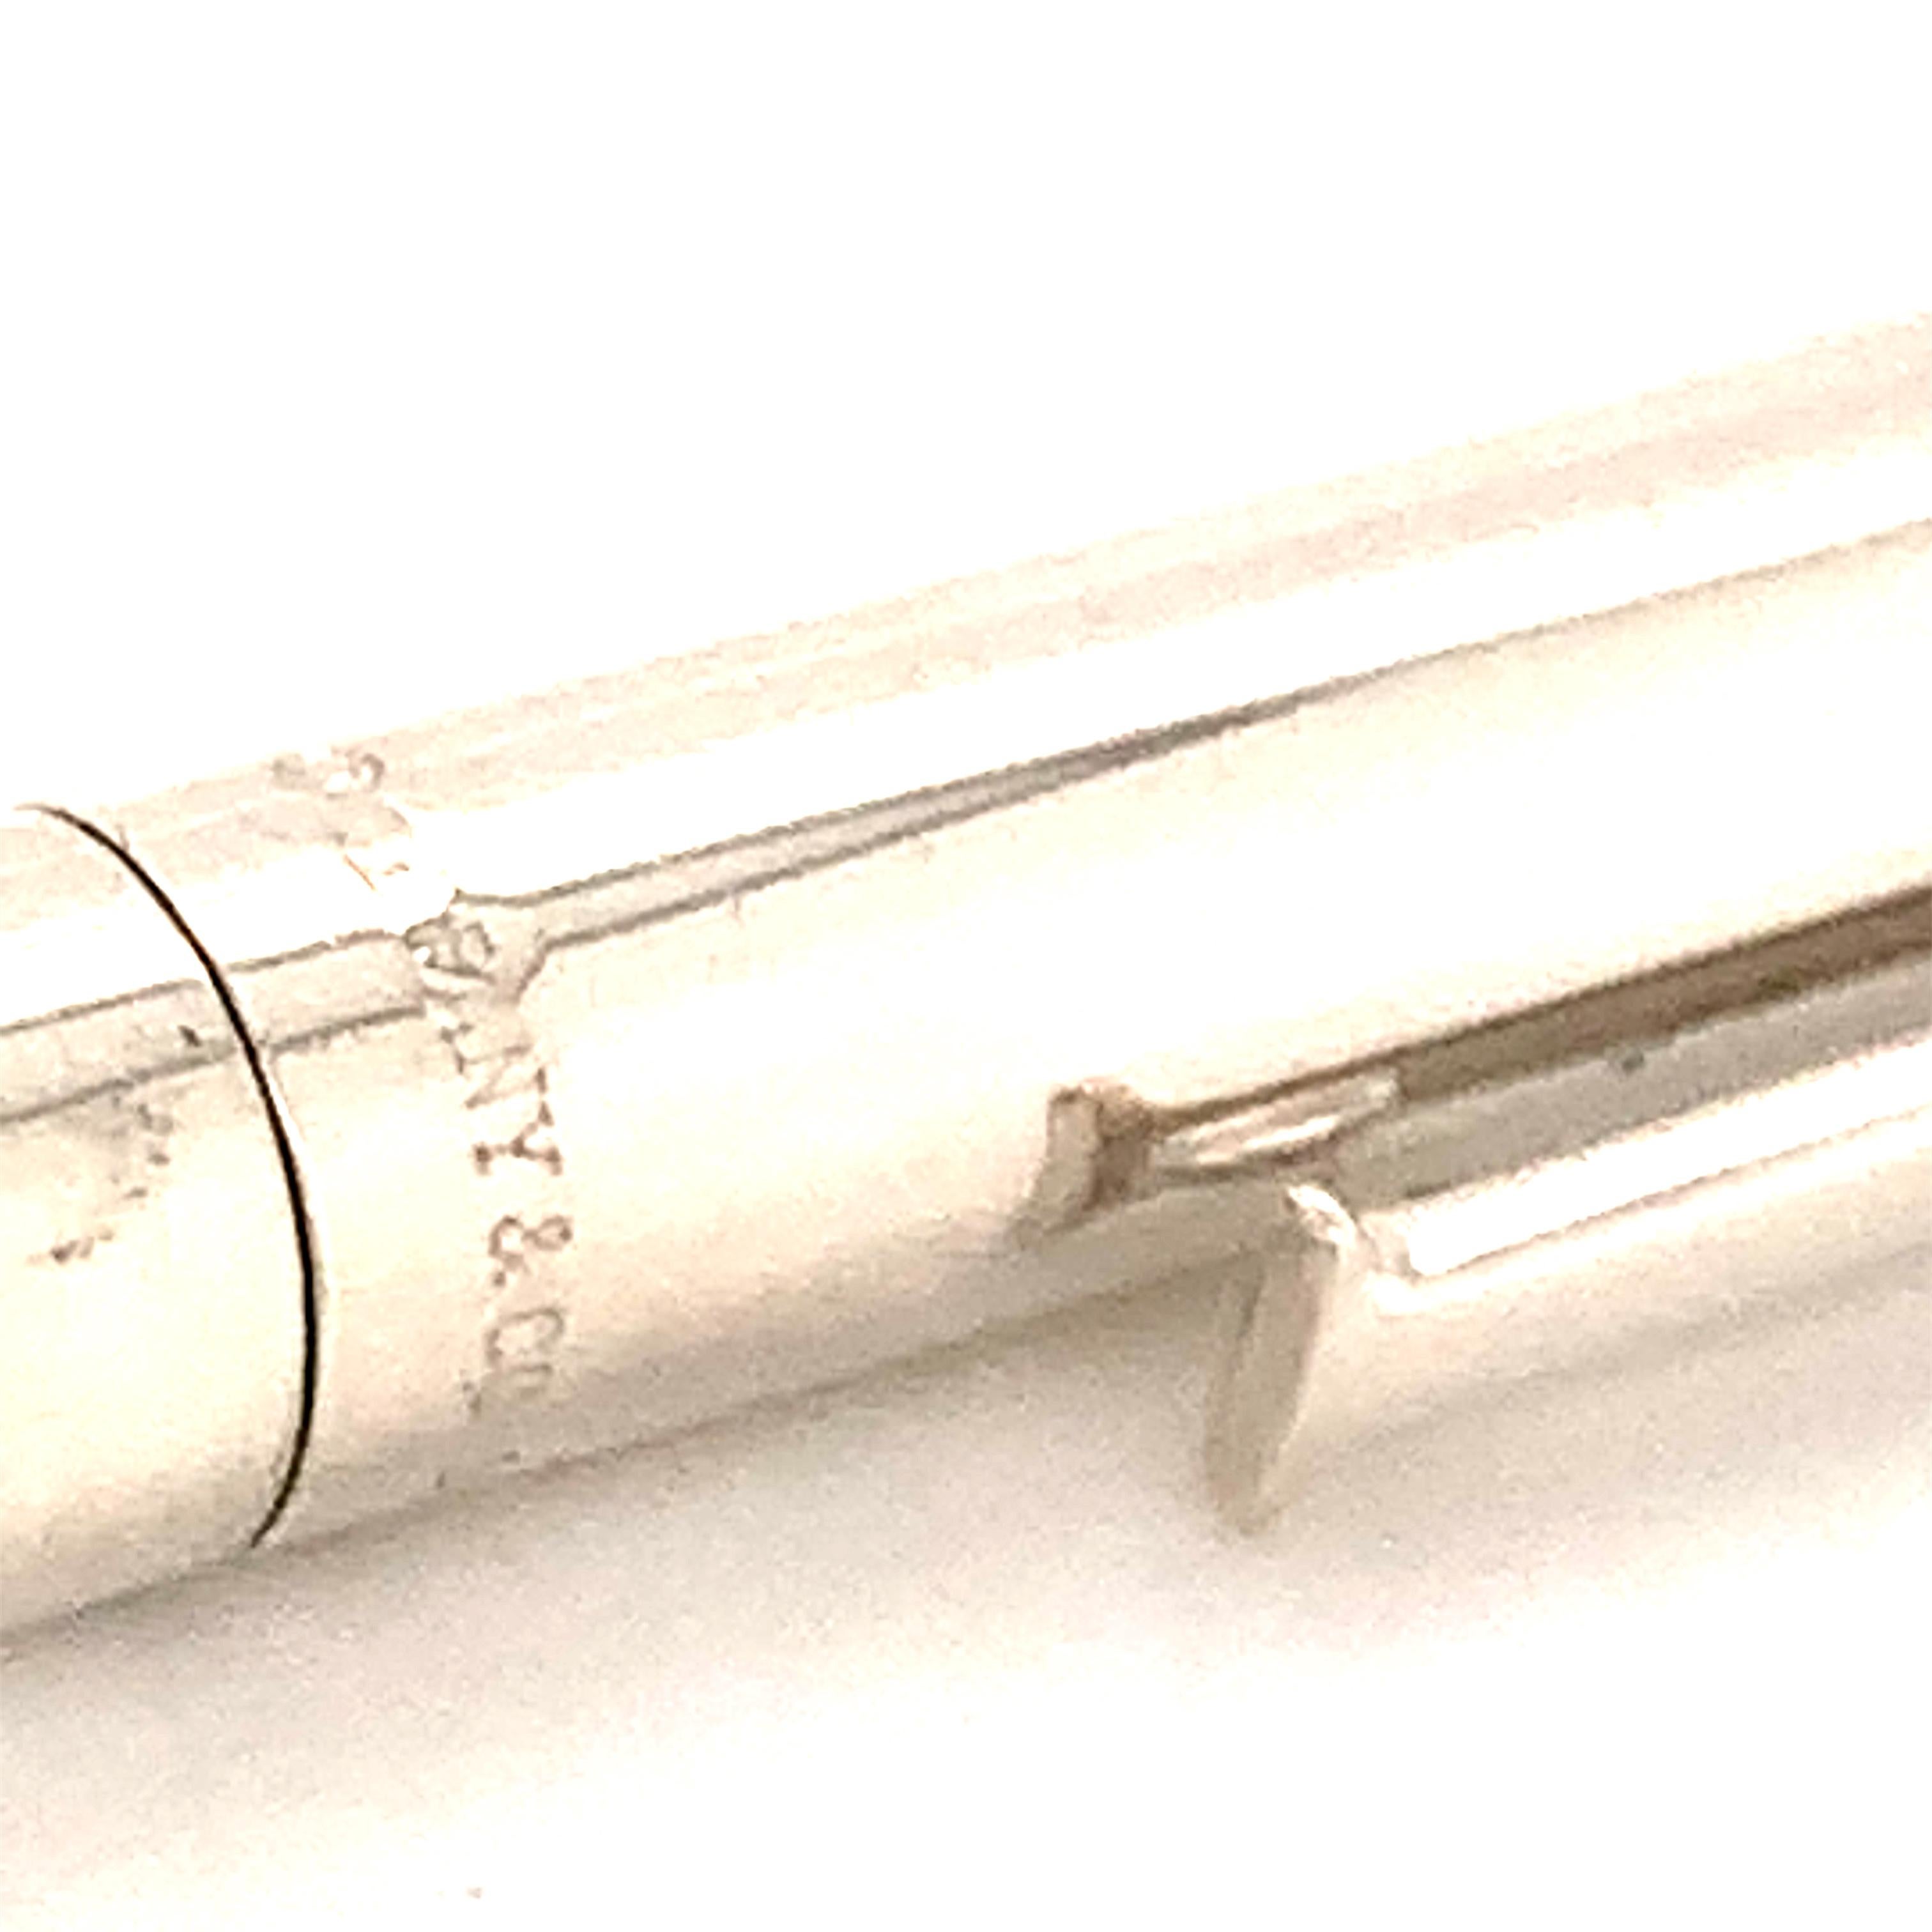 Tiffany & Co Estate Sterling Silver Pen 5 Inches 21.8 Grams TIF89

This elegant Authentic Tiffany & Co sterling silver pen is 5 inches in size and has a weight of 21.8 Grams.

These pens were newly polished and look like new. Consider that new ink